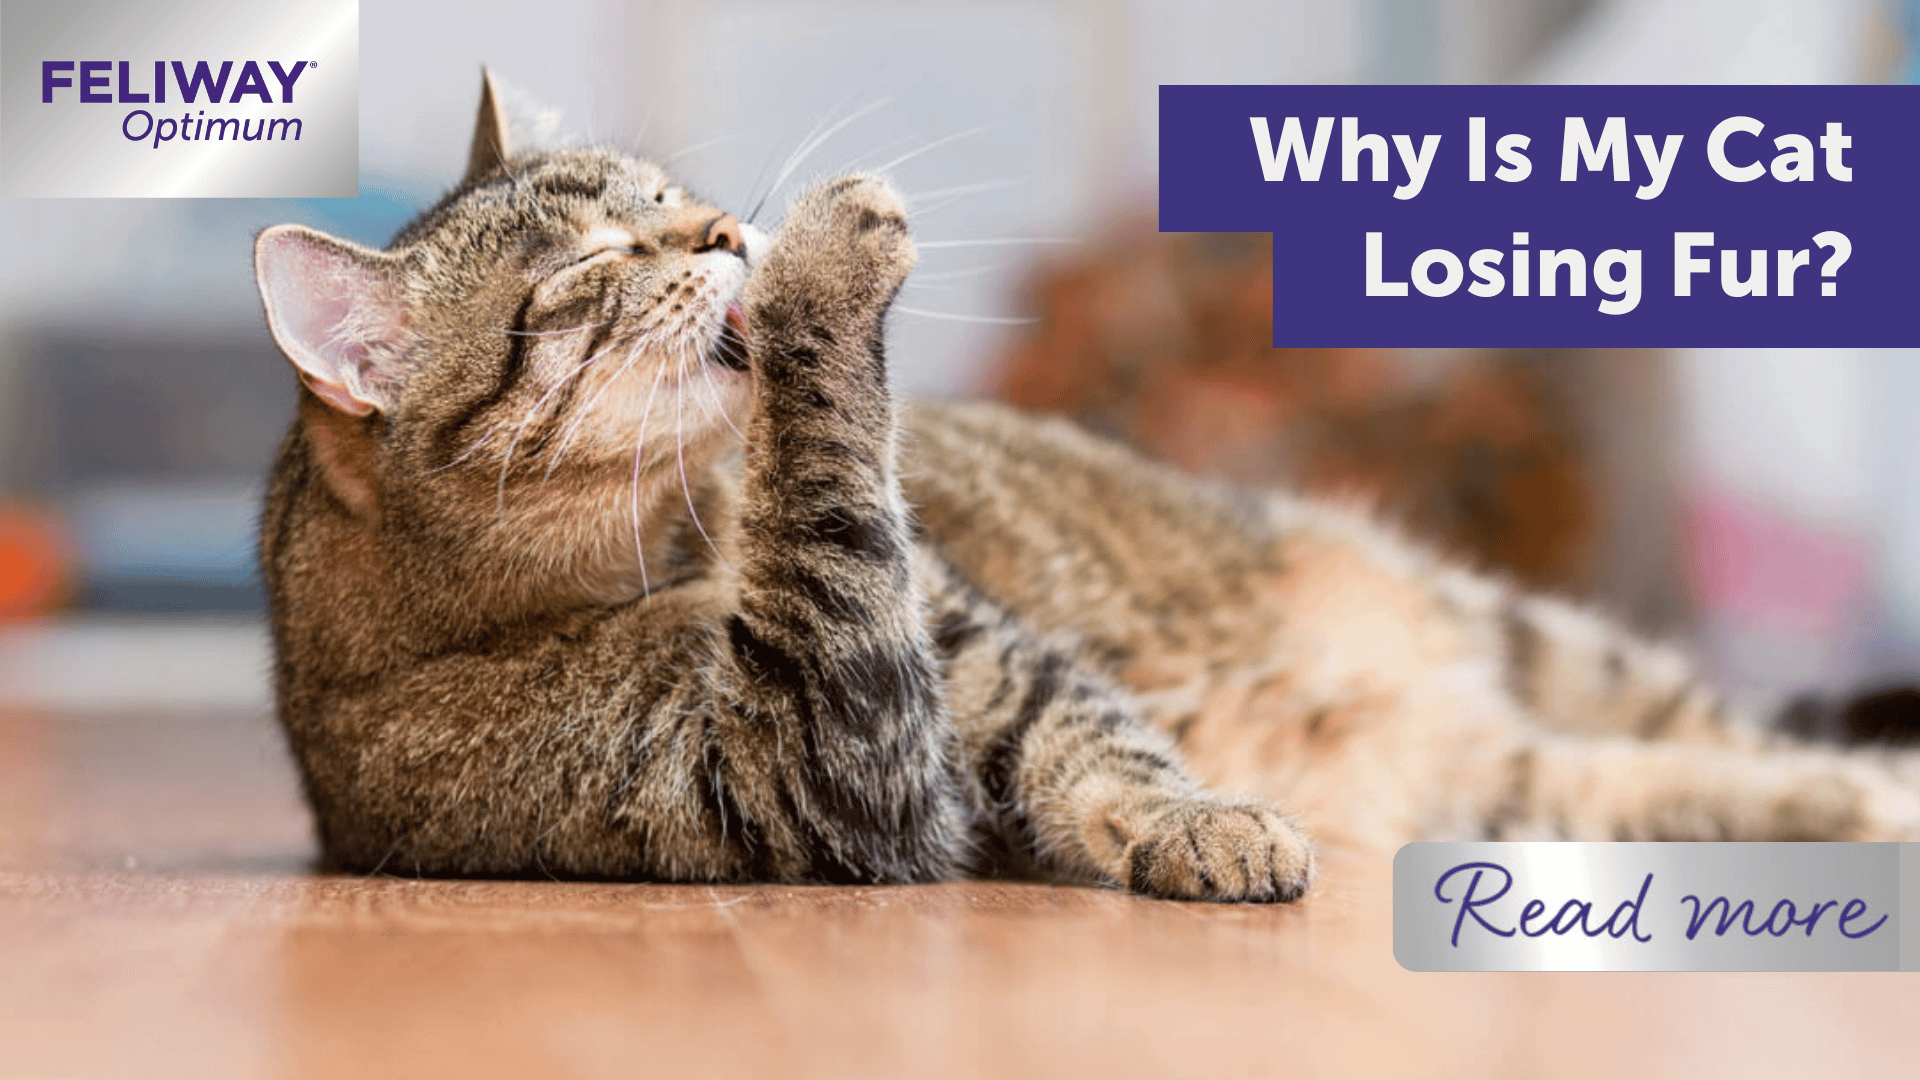 Why Is My Cat Losing Fur?